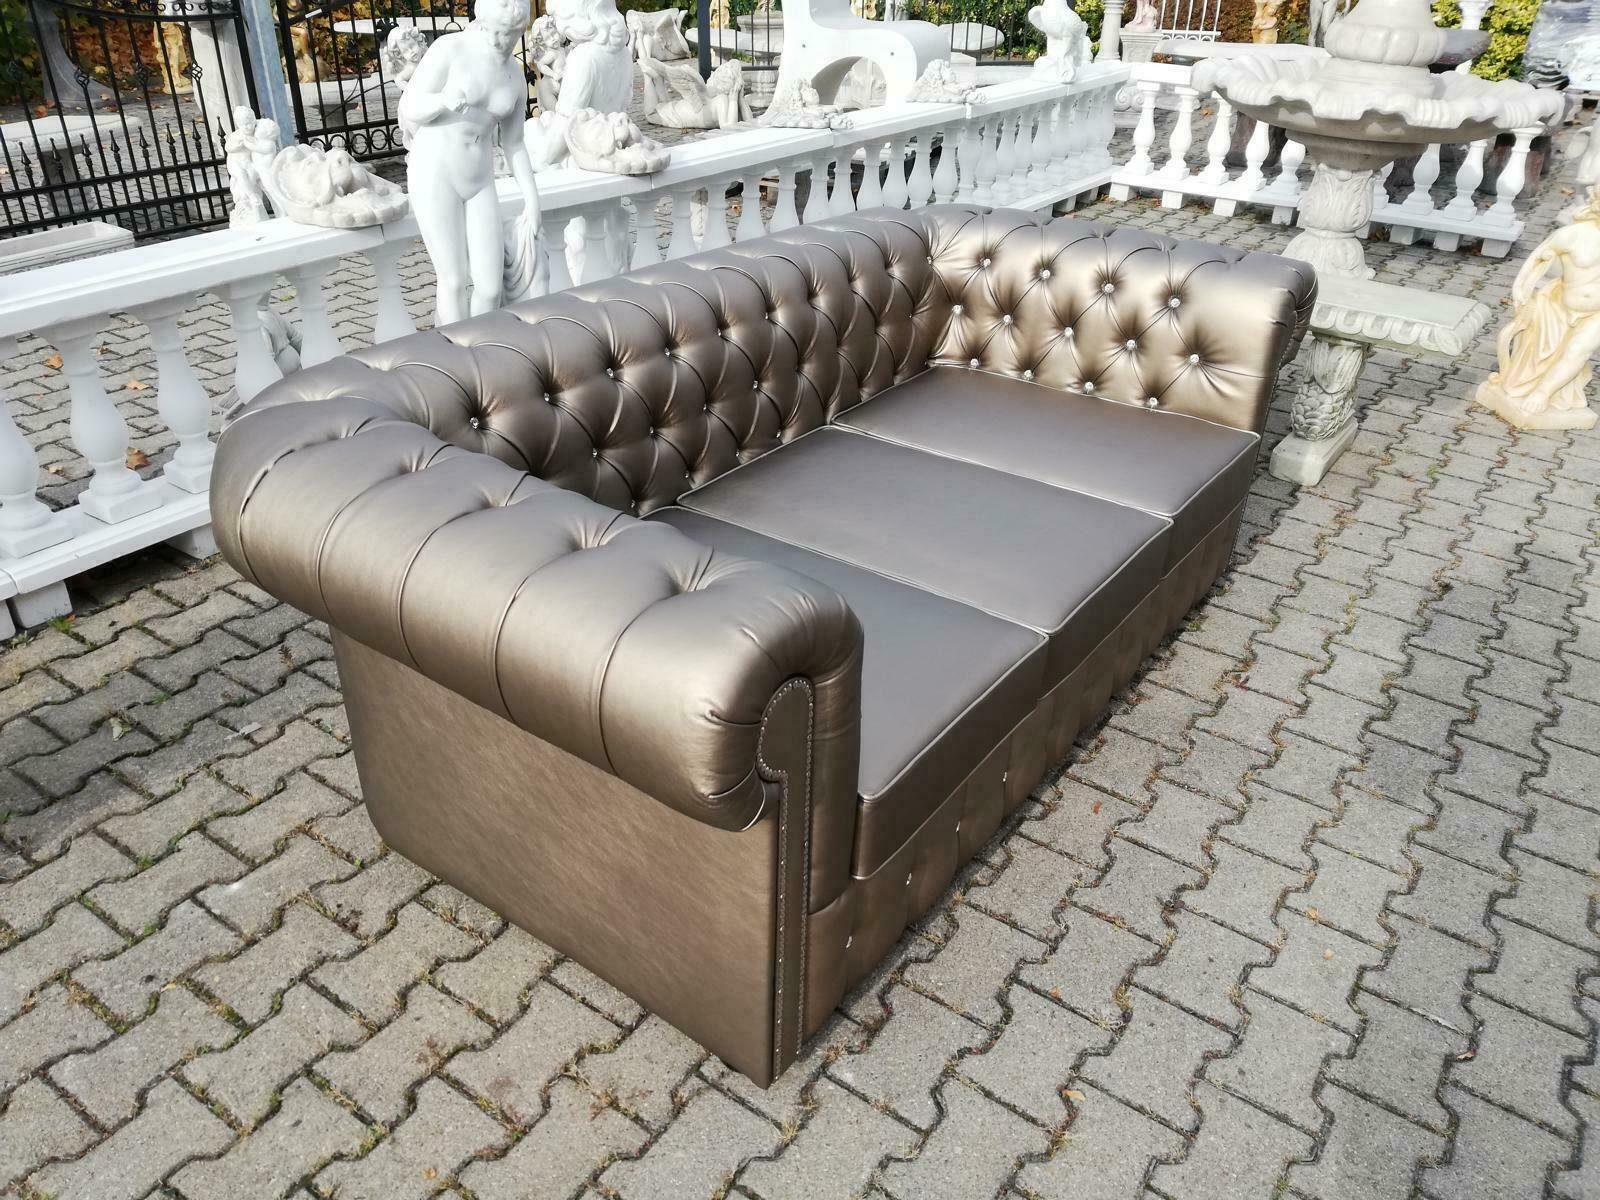 JVmoebel Chesterfield-Sofa, Couch Design Sofa Gold Chesterfield 3-Sitzer